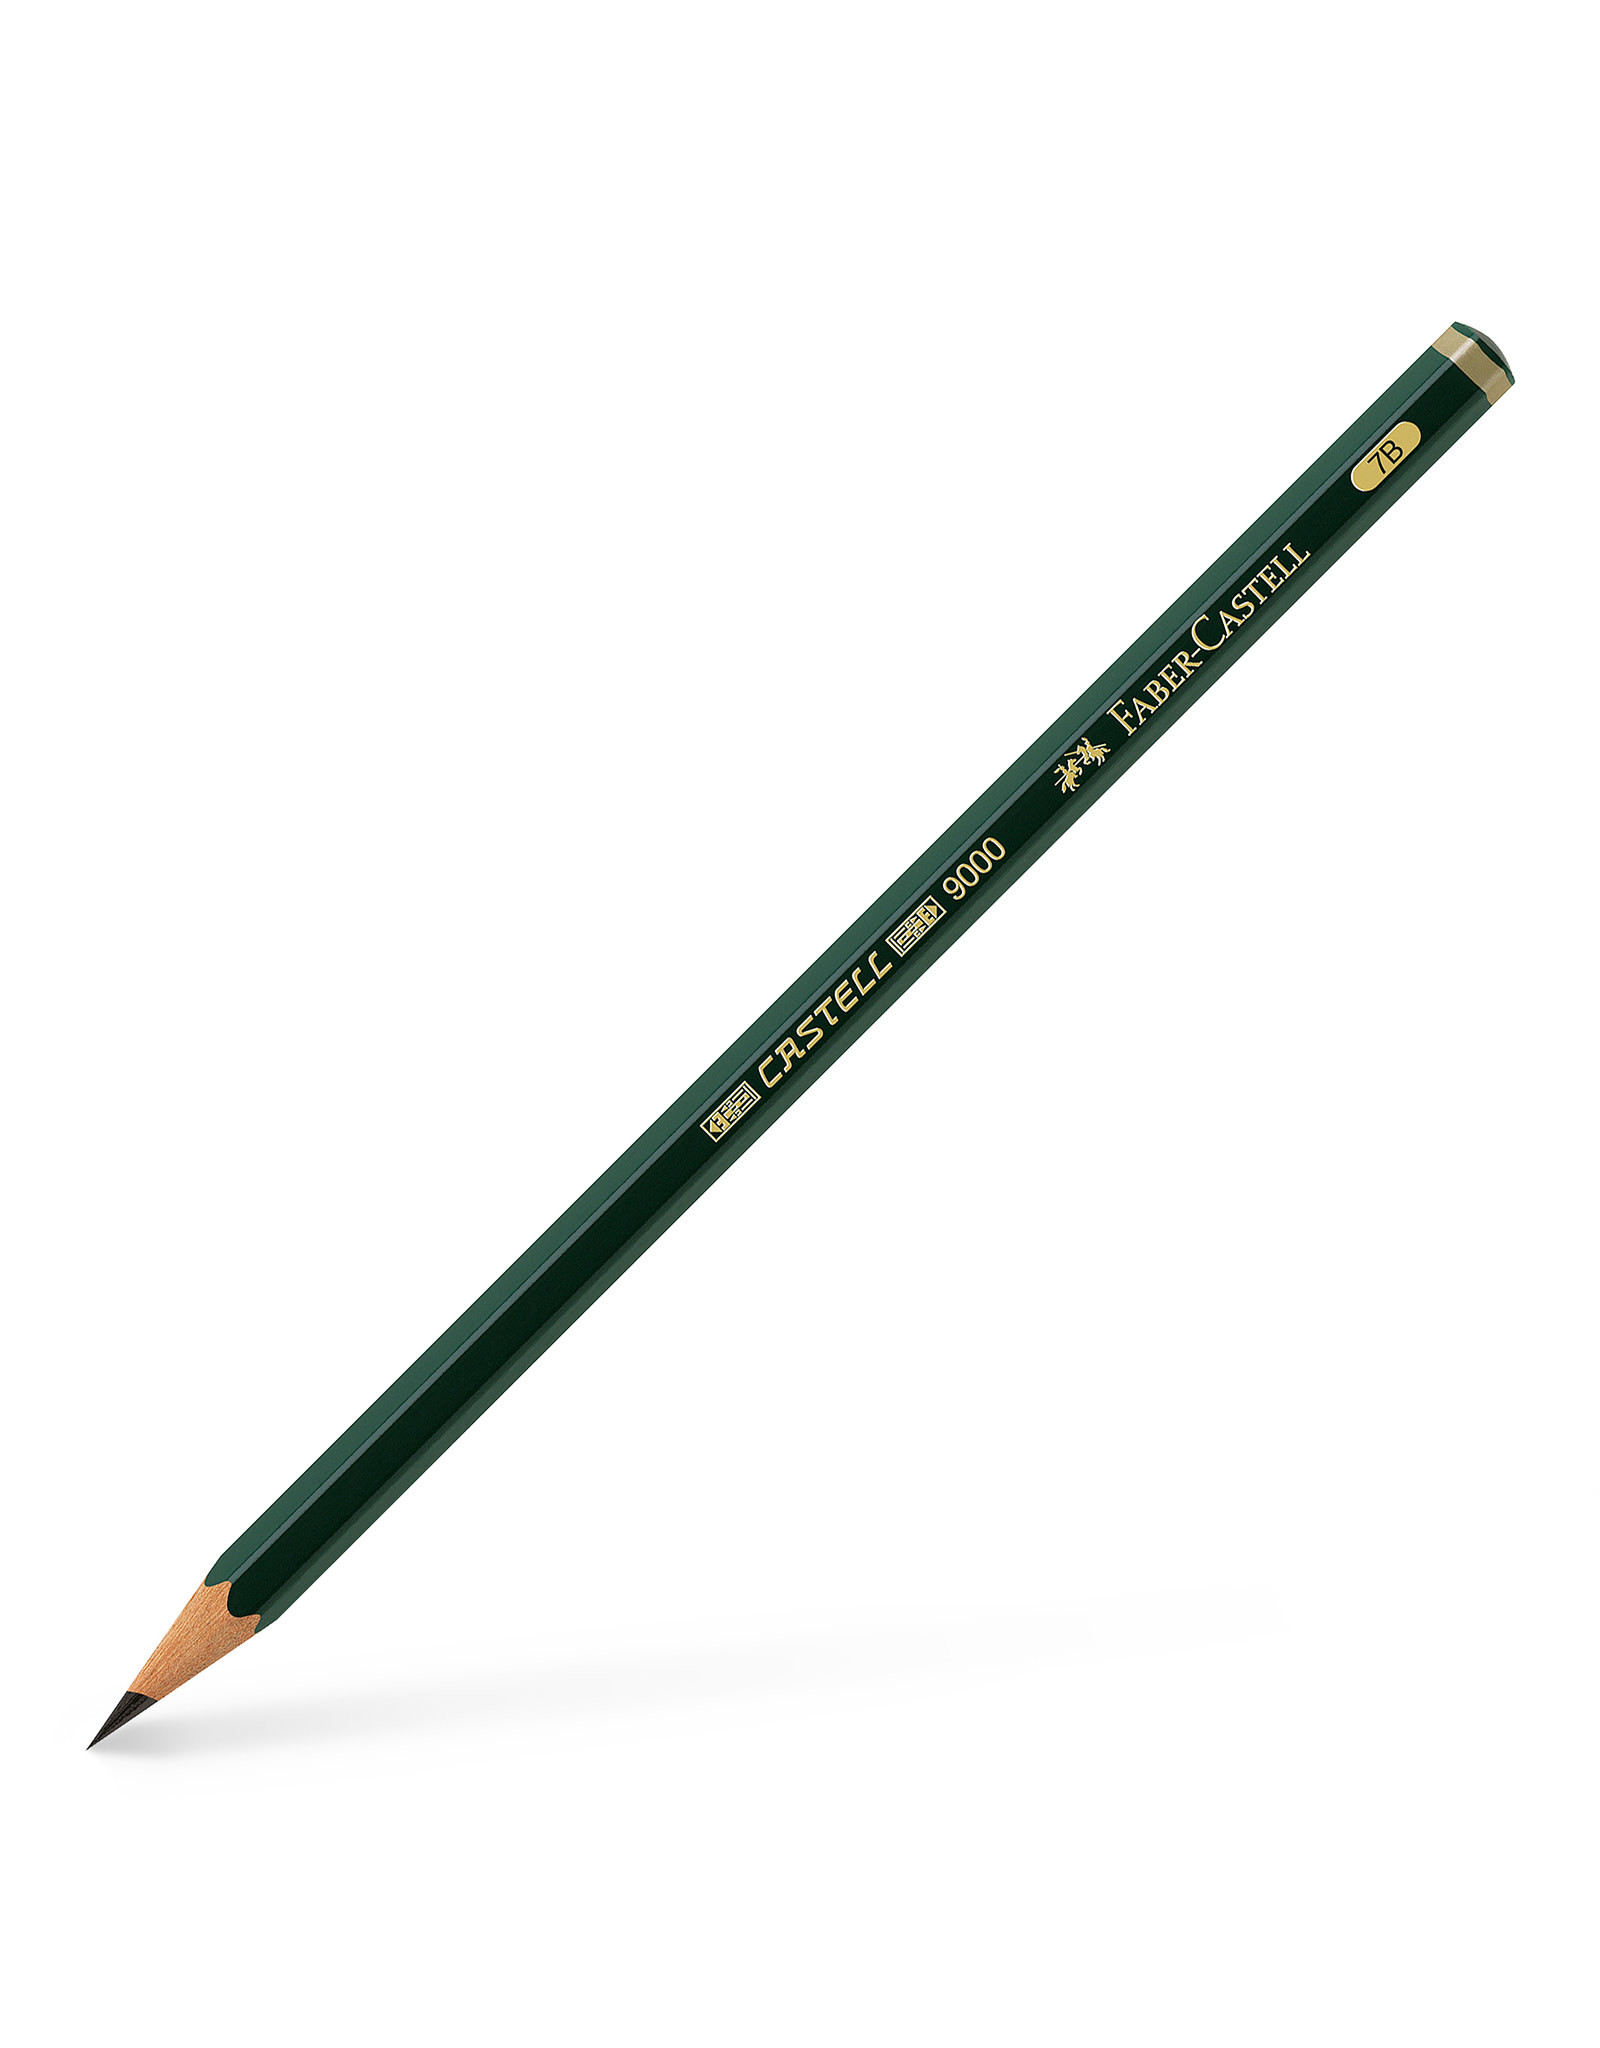 FABER-CASTELL Castell® 9000 Graphite Pencil, 7B